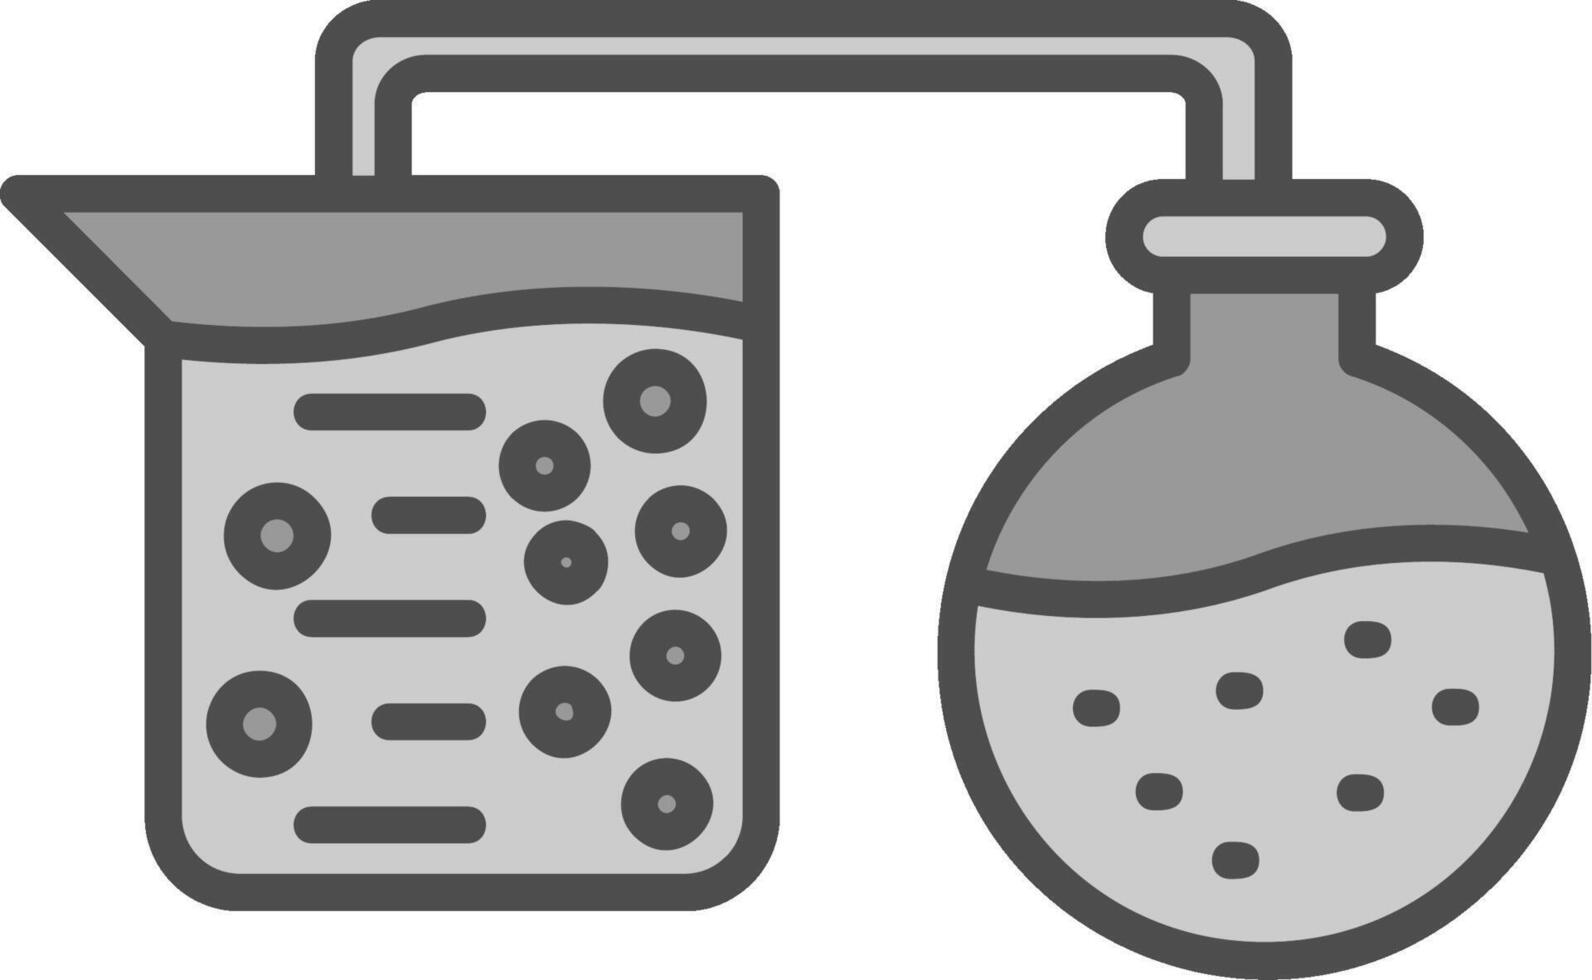 Flask Line Filled Greyscale Icon Design vector